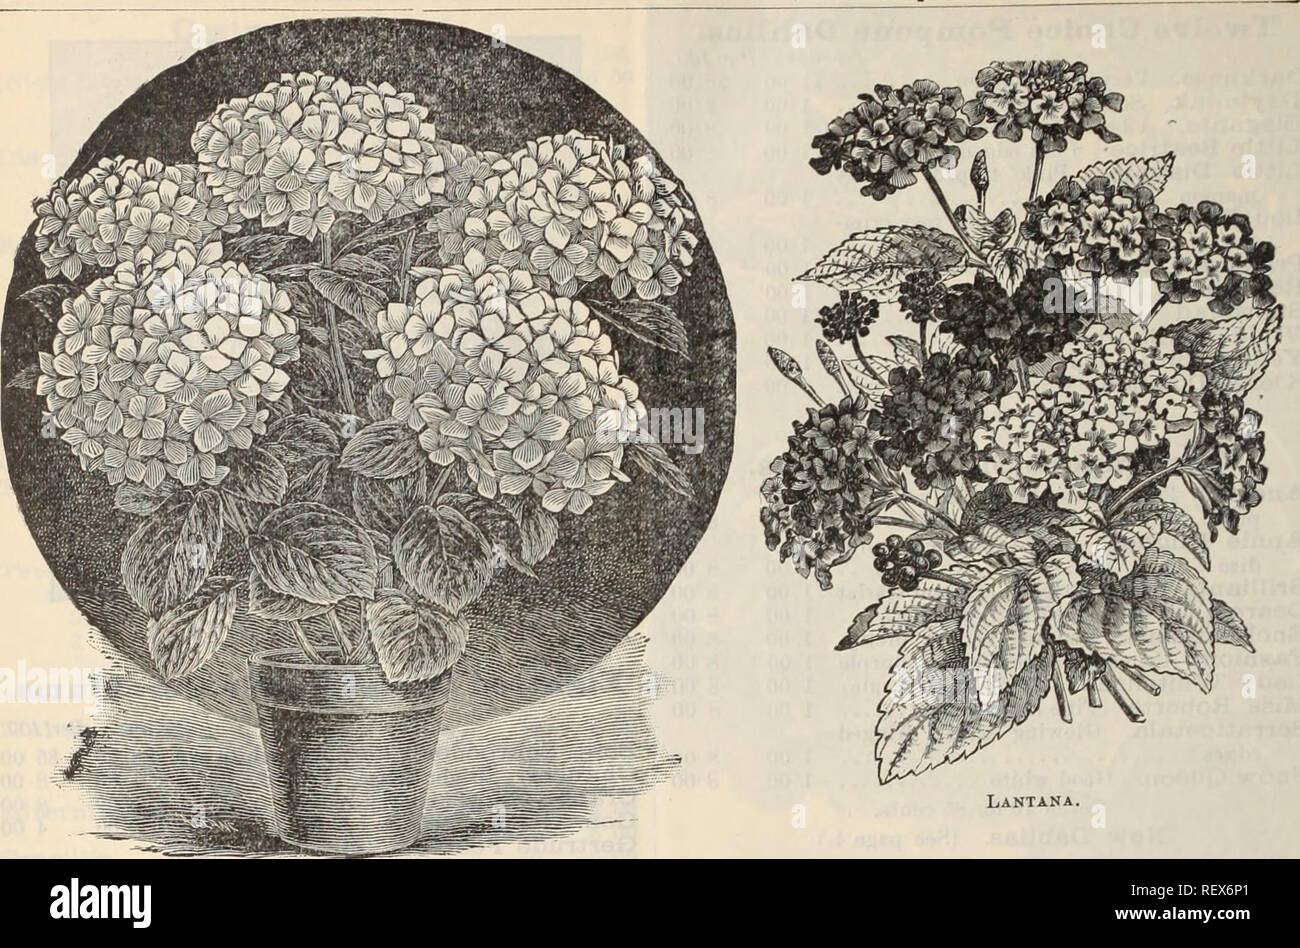 . Dreer's wholesale price list / Henry A. Dreer.. Nursery Catalogue. 16 HENRY A. DREER. 714 Chestnut Street, Philadelphia, Pa,. Hydrangea Otaksa Monstbosa. Gloxinia. Per doz. Per 100. Crassifolia Grandiflora. (See p. 6)... 50 f 4 00 Bine Spotted, &quot; 6 ... 50 4 00 Red Spotted, &quot; 6 ... 50 4 00 Pare White, &quot; 6 ... 50 4 00 Heliotropes. Chieftain. Lilac large truss 50 4 00 Comtesse Mortemart. Velvety blue.. 50 4 00 Mad. Bruant. Very dark blue 50 4 00 Mad. Rene Andre. Dark violet 50 4 00 Mad. de Blonay. Large v?hite 50 4 00 Mad. de Bussey. Large dark purple... 50 4 00 Liizzie Cook. Dee Stock Photo